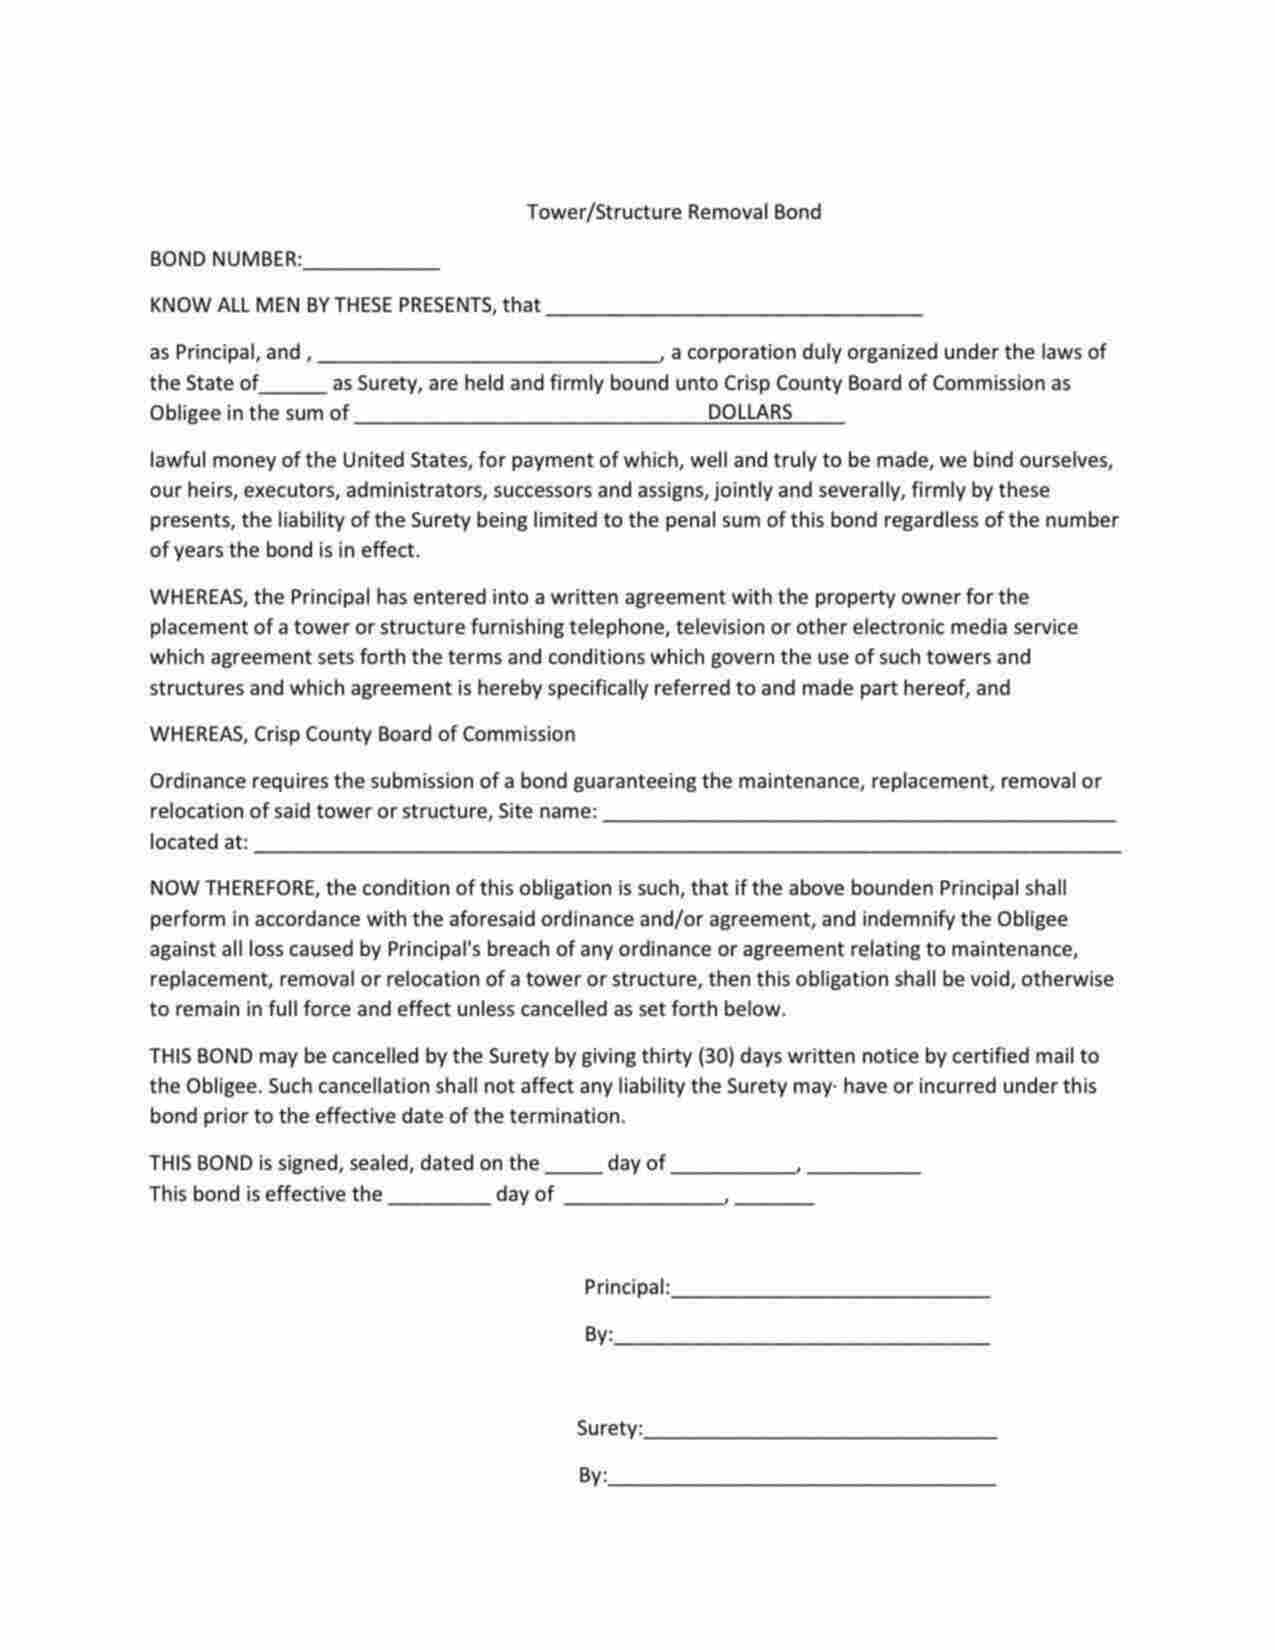 Georgia Tower/Structure Removal Bond Form